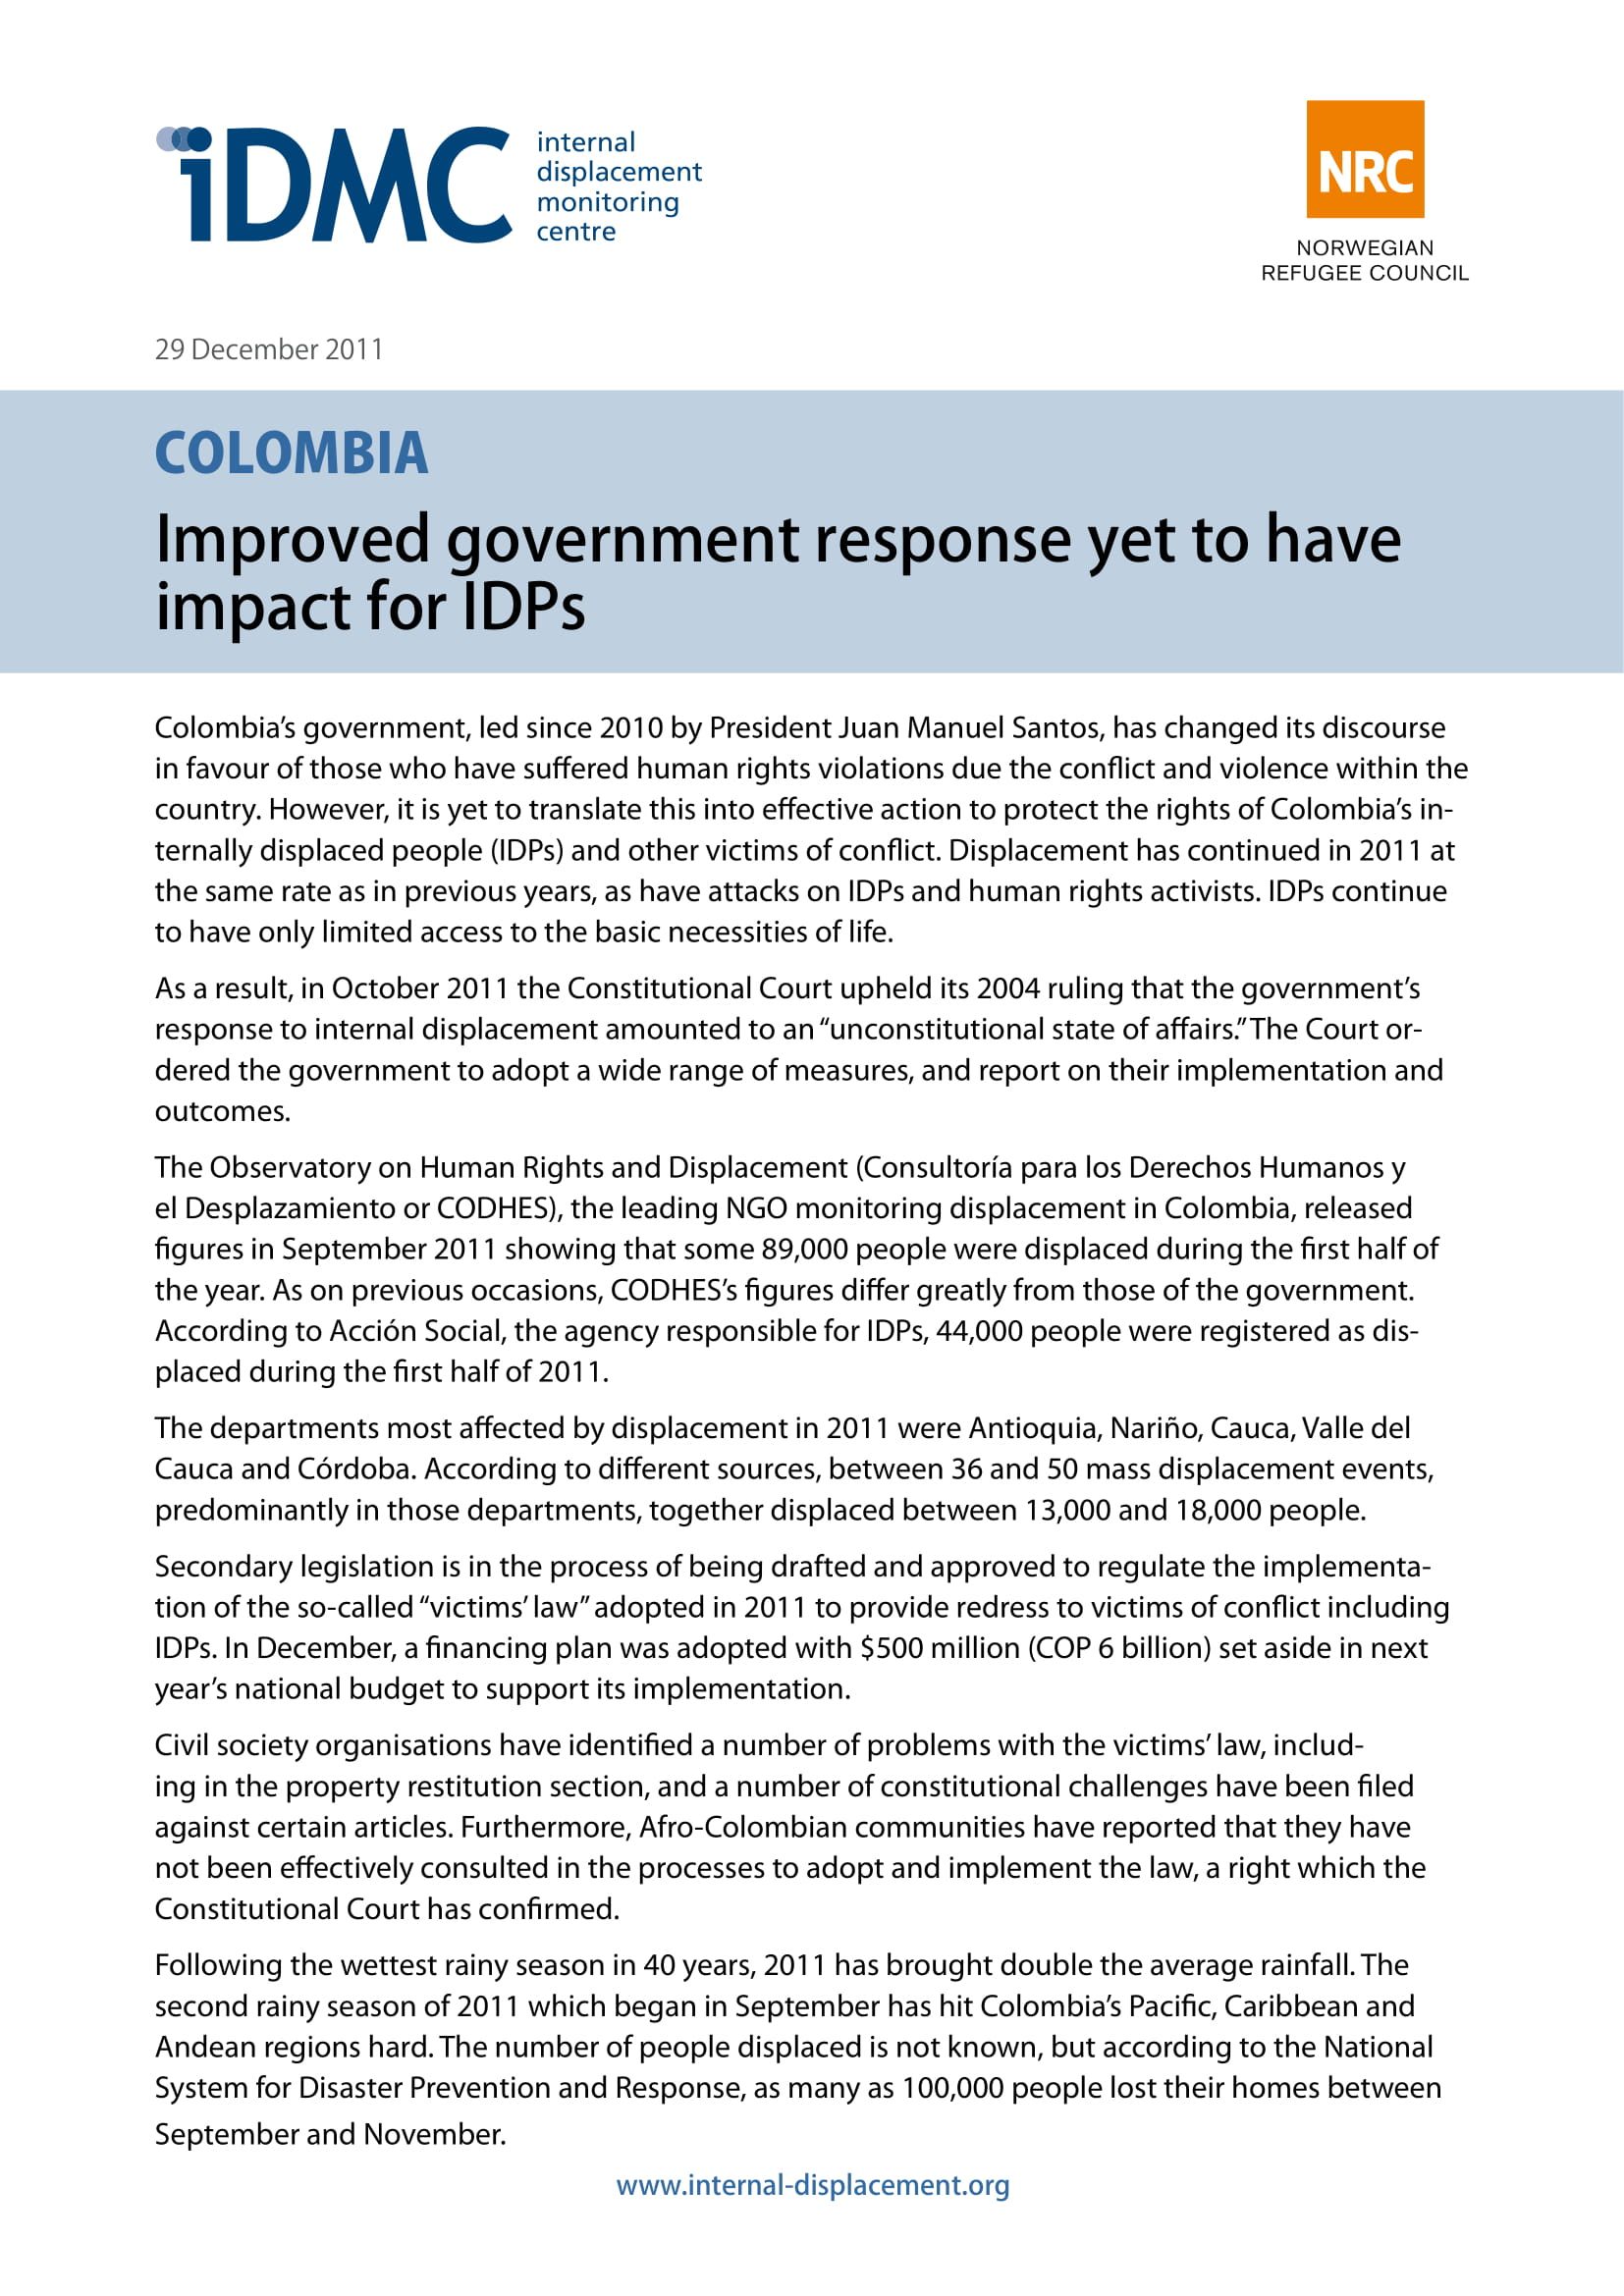 Colombia: Improved government response yet to have impact for IDPs